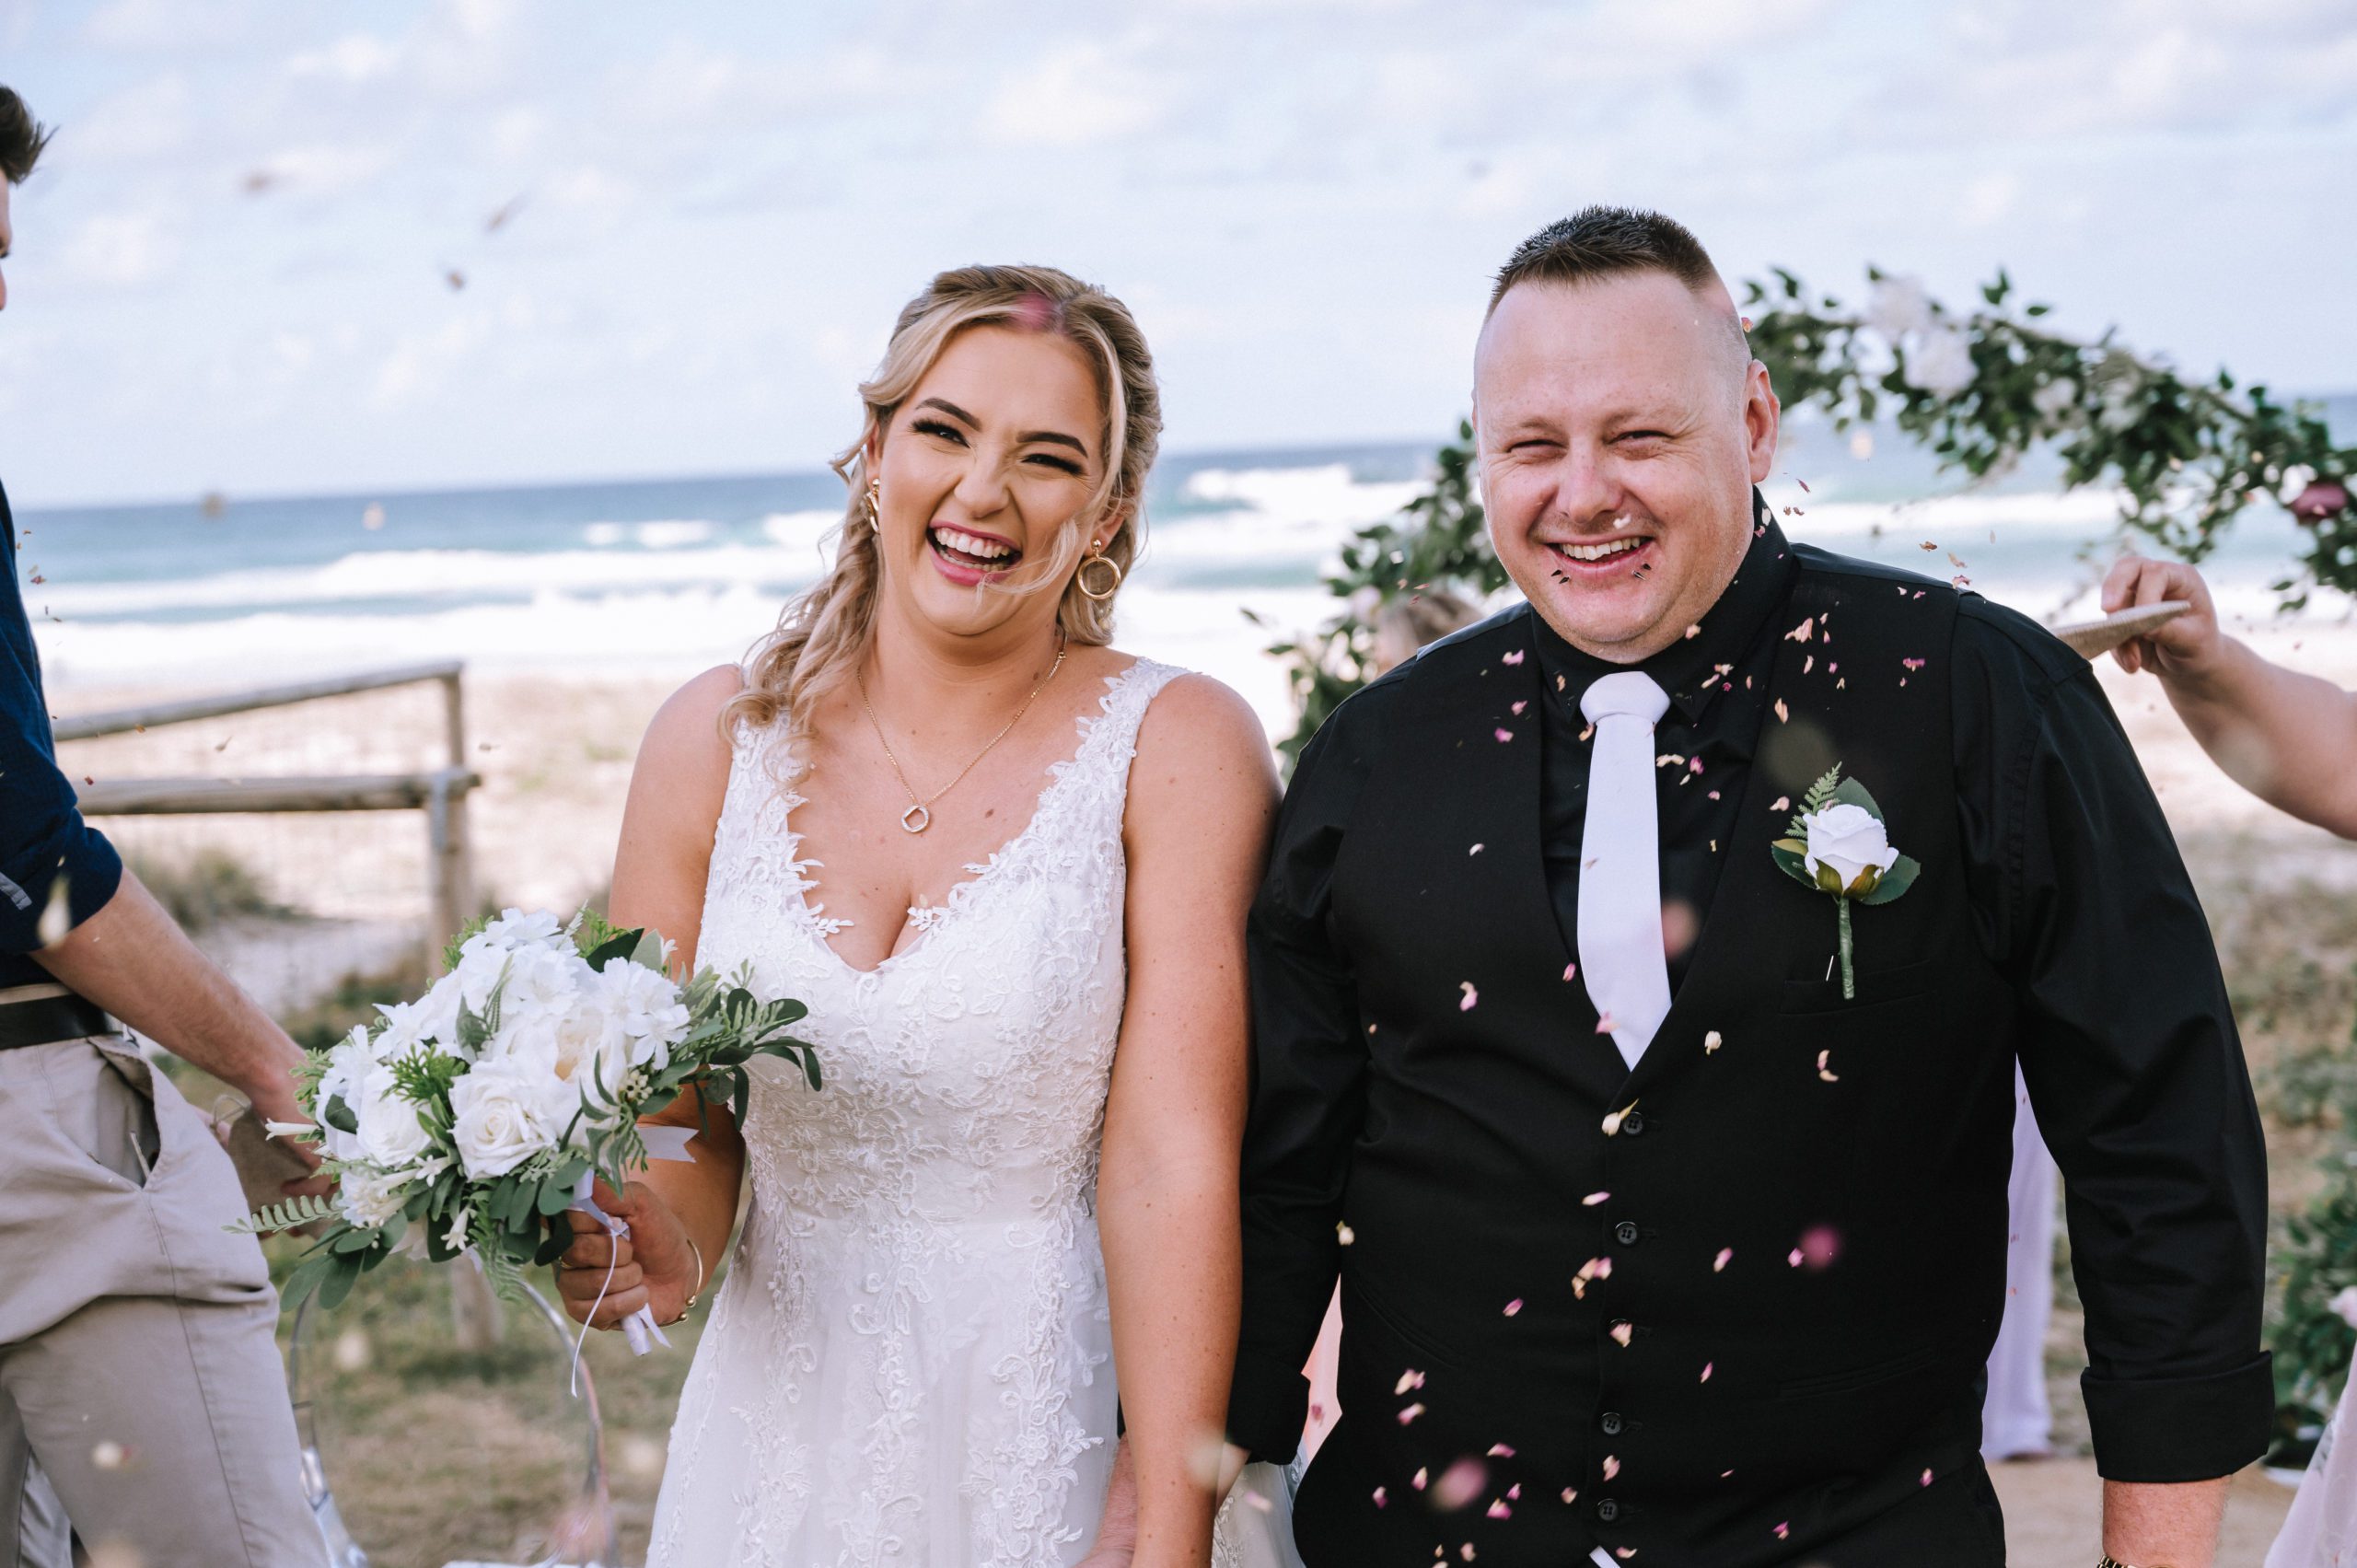 Beach wedding with confetti being thrown over the couple